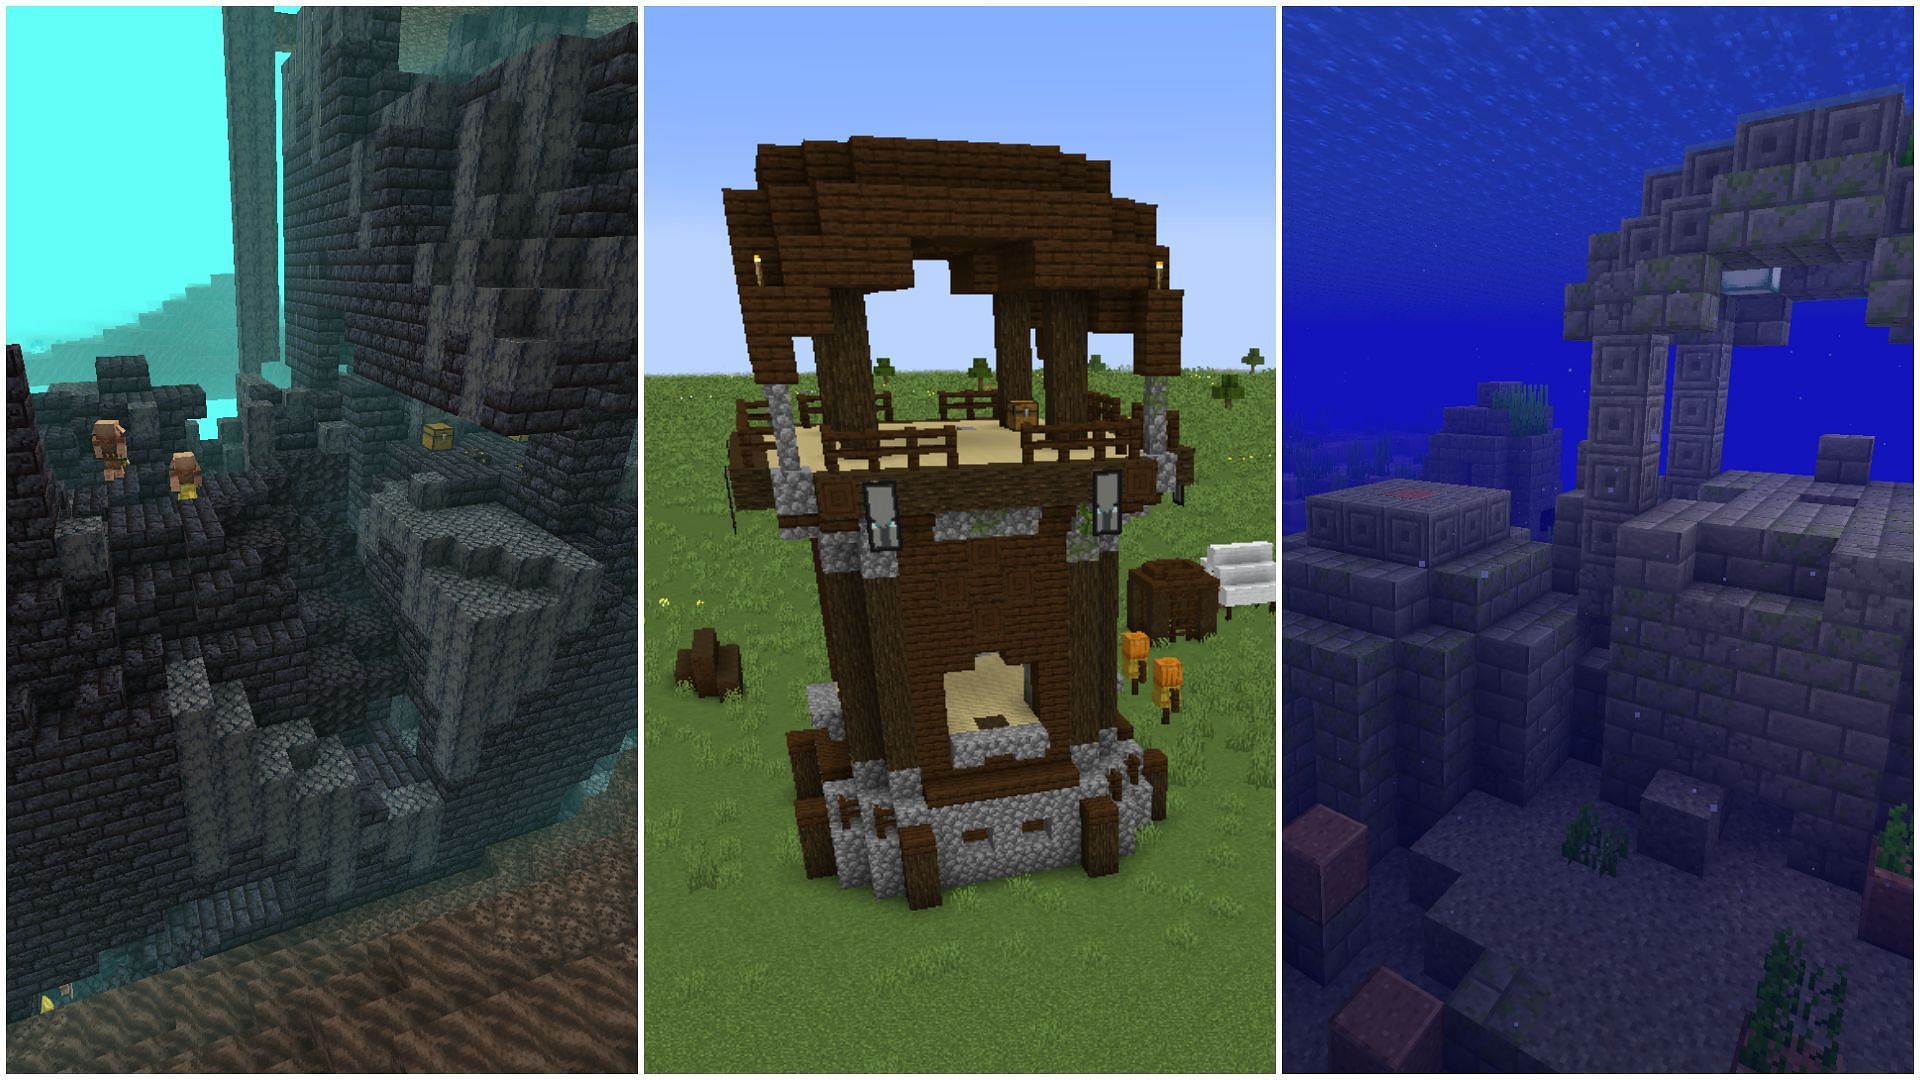 Smithing templates can be found in various structures in Minecraft (Image via Sportskeeda)